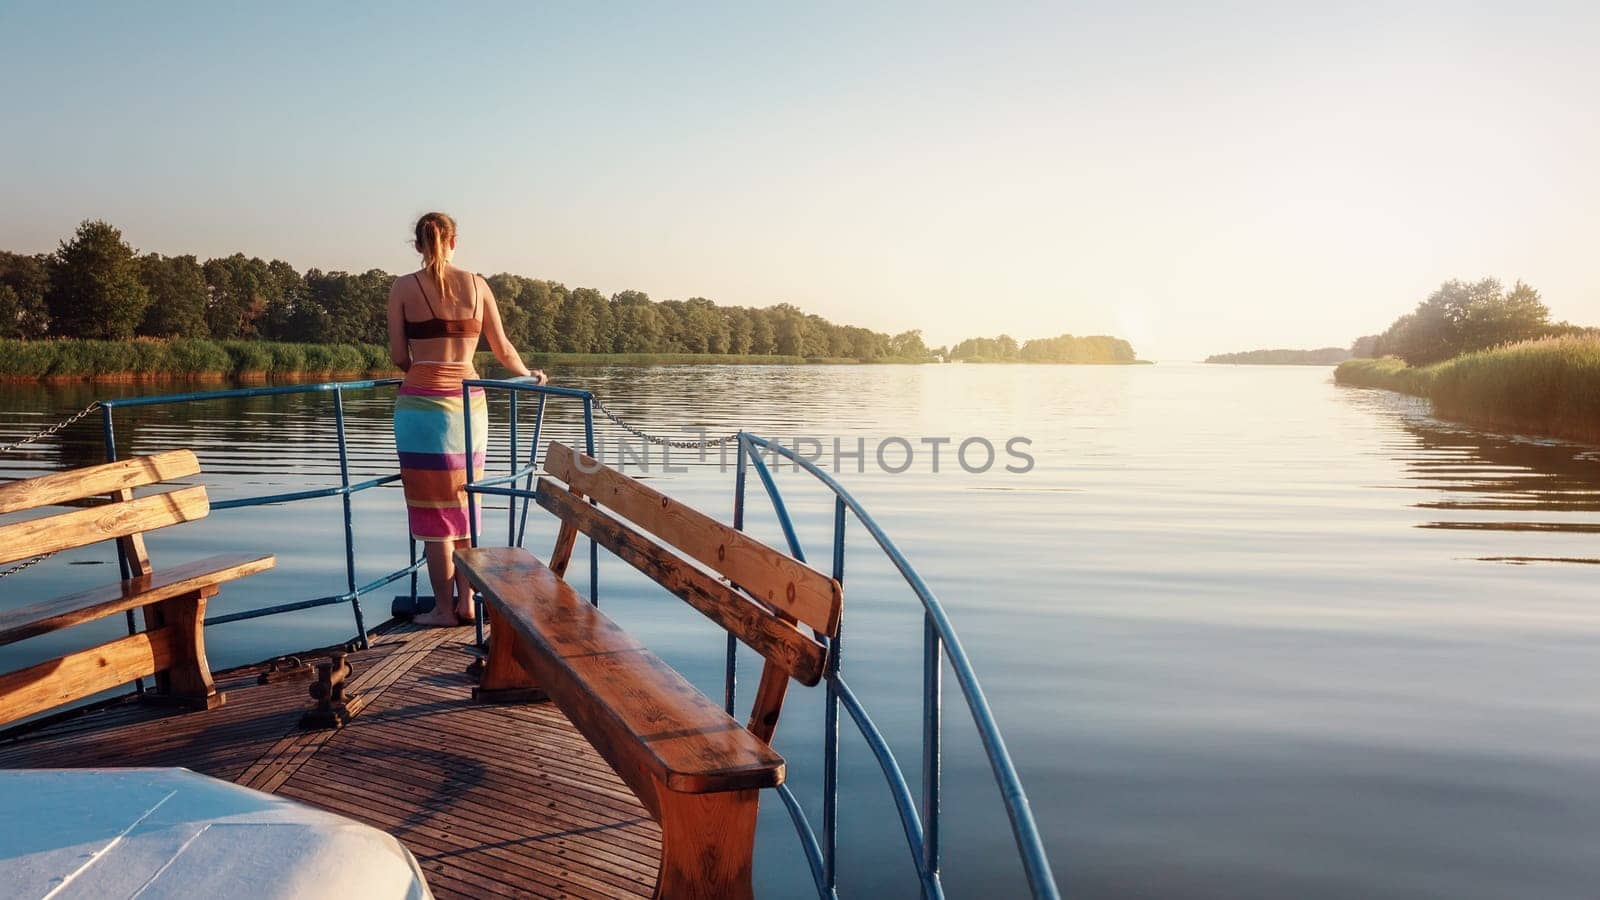 A beautiful young girl stands at the front of the ship and watches the quiet evening sunset